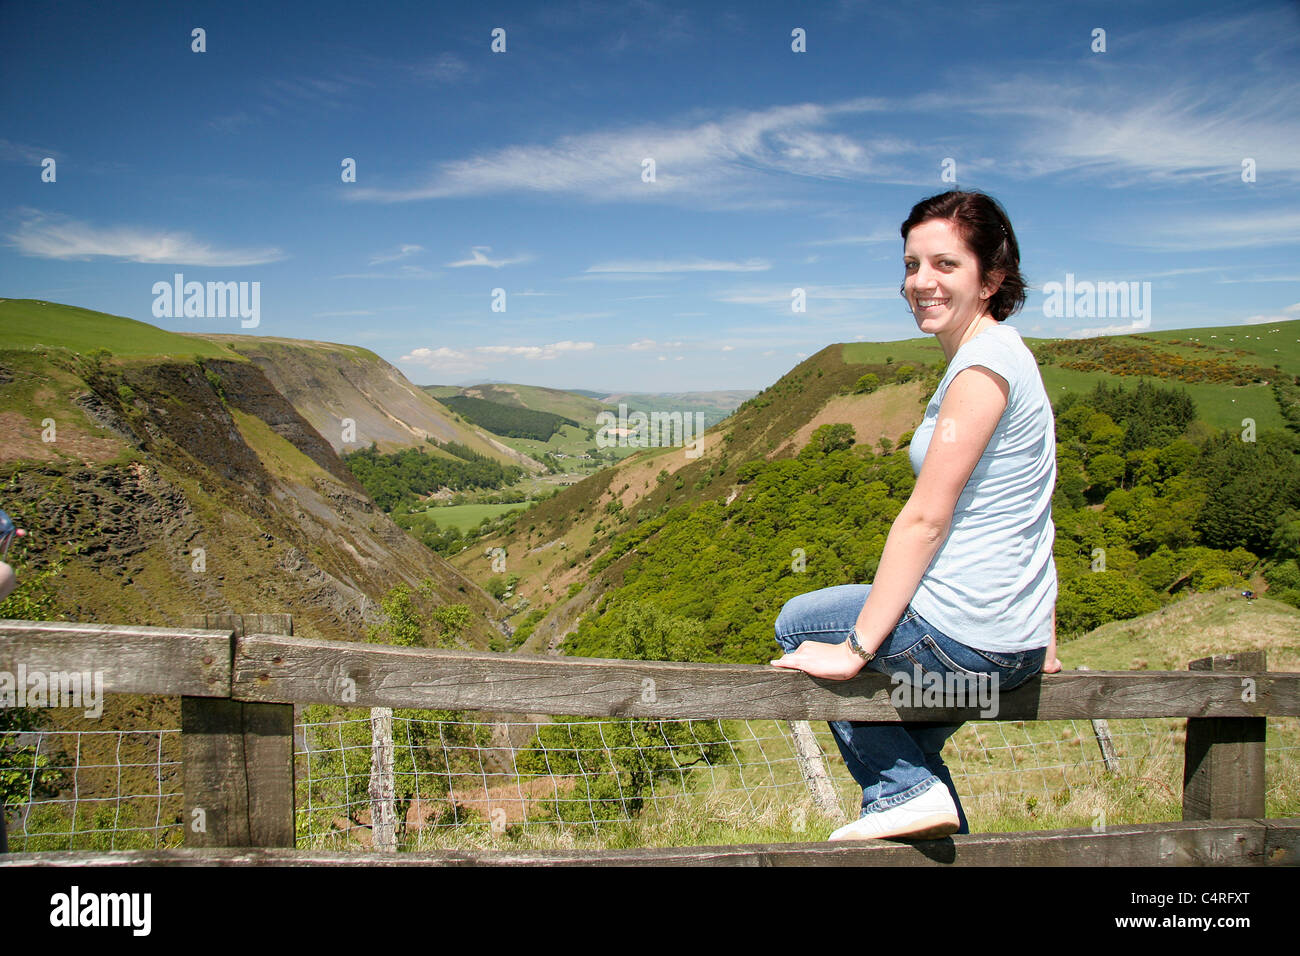 Enjoying the view over the Dylife Gorge, Wales Stock Photo